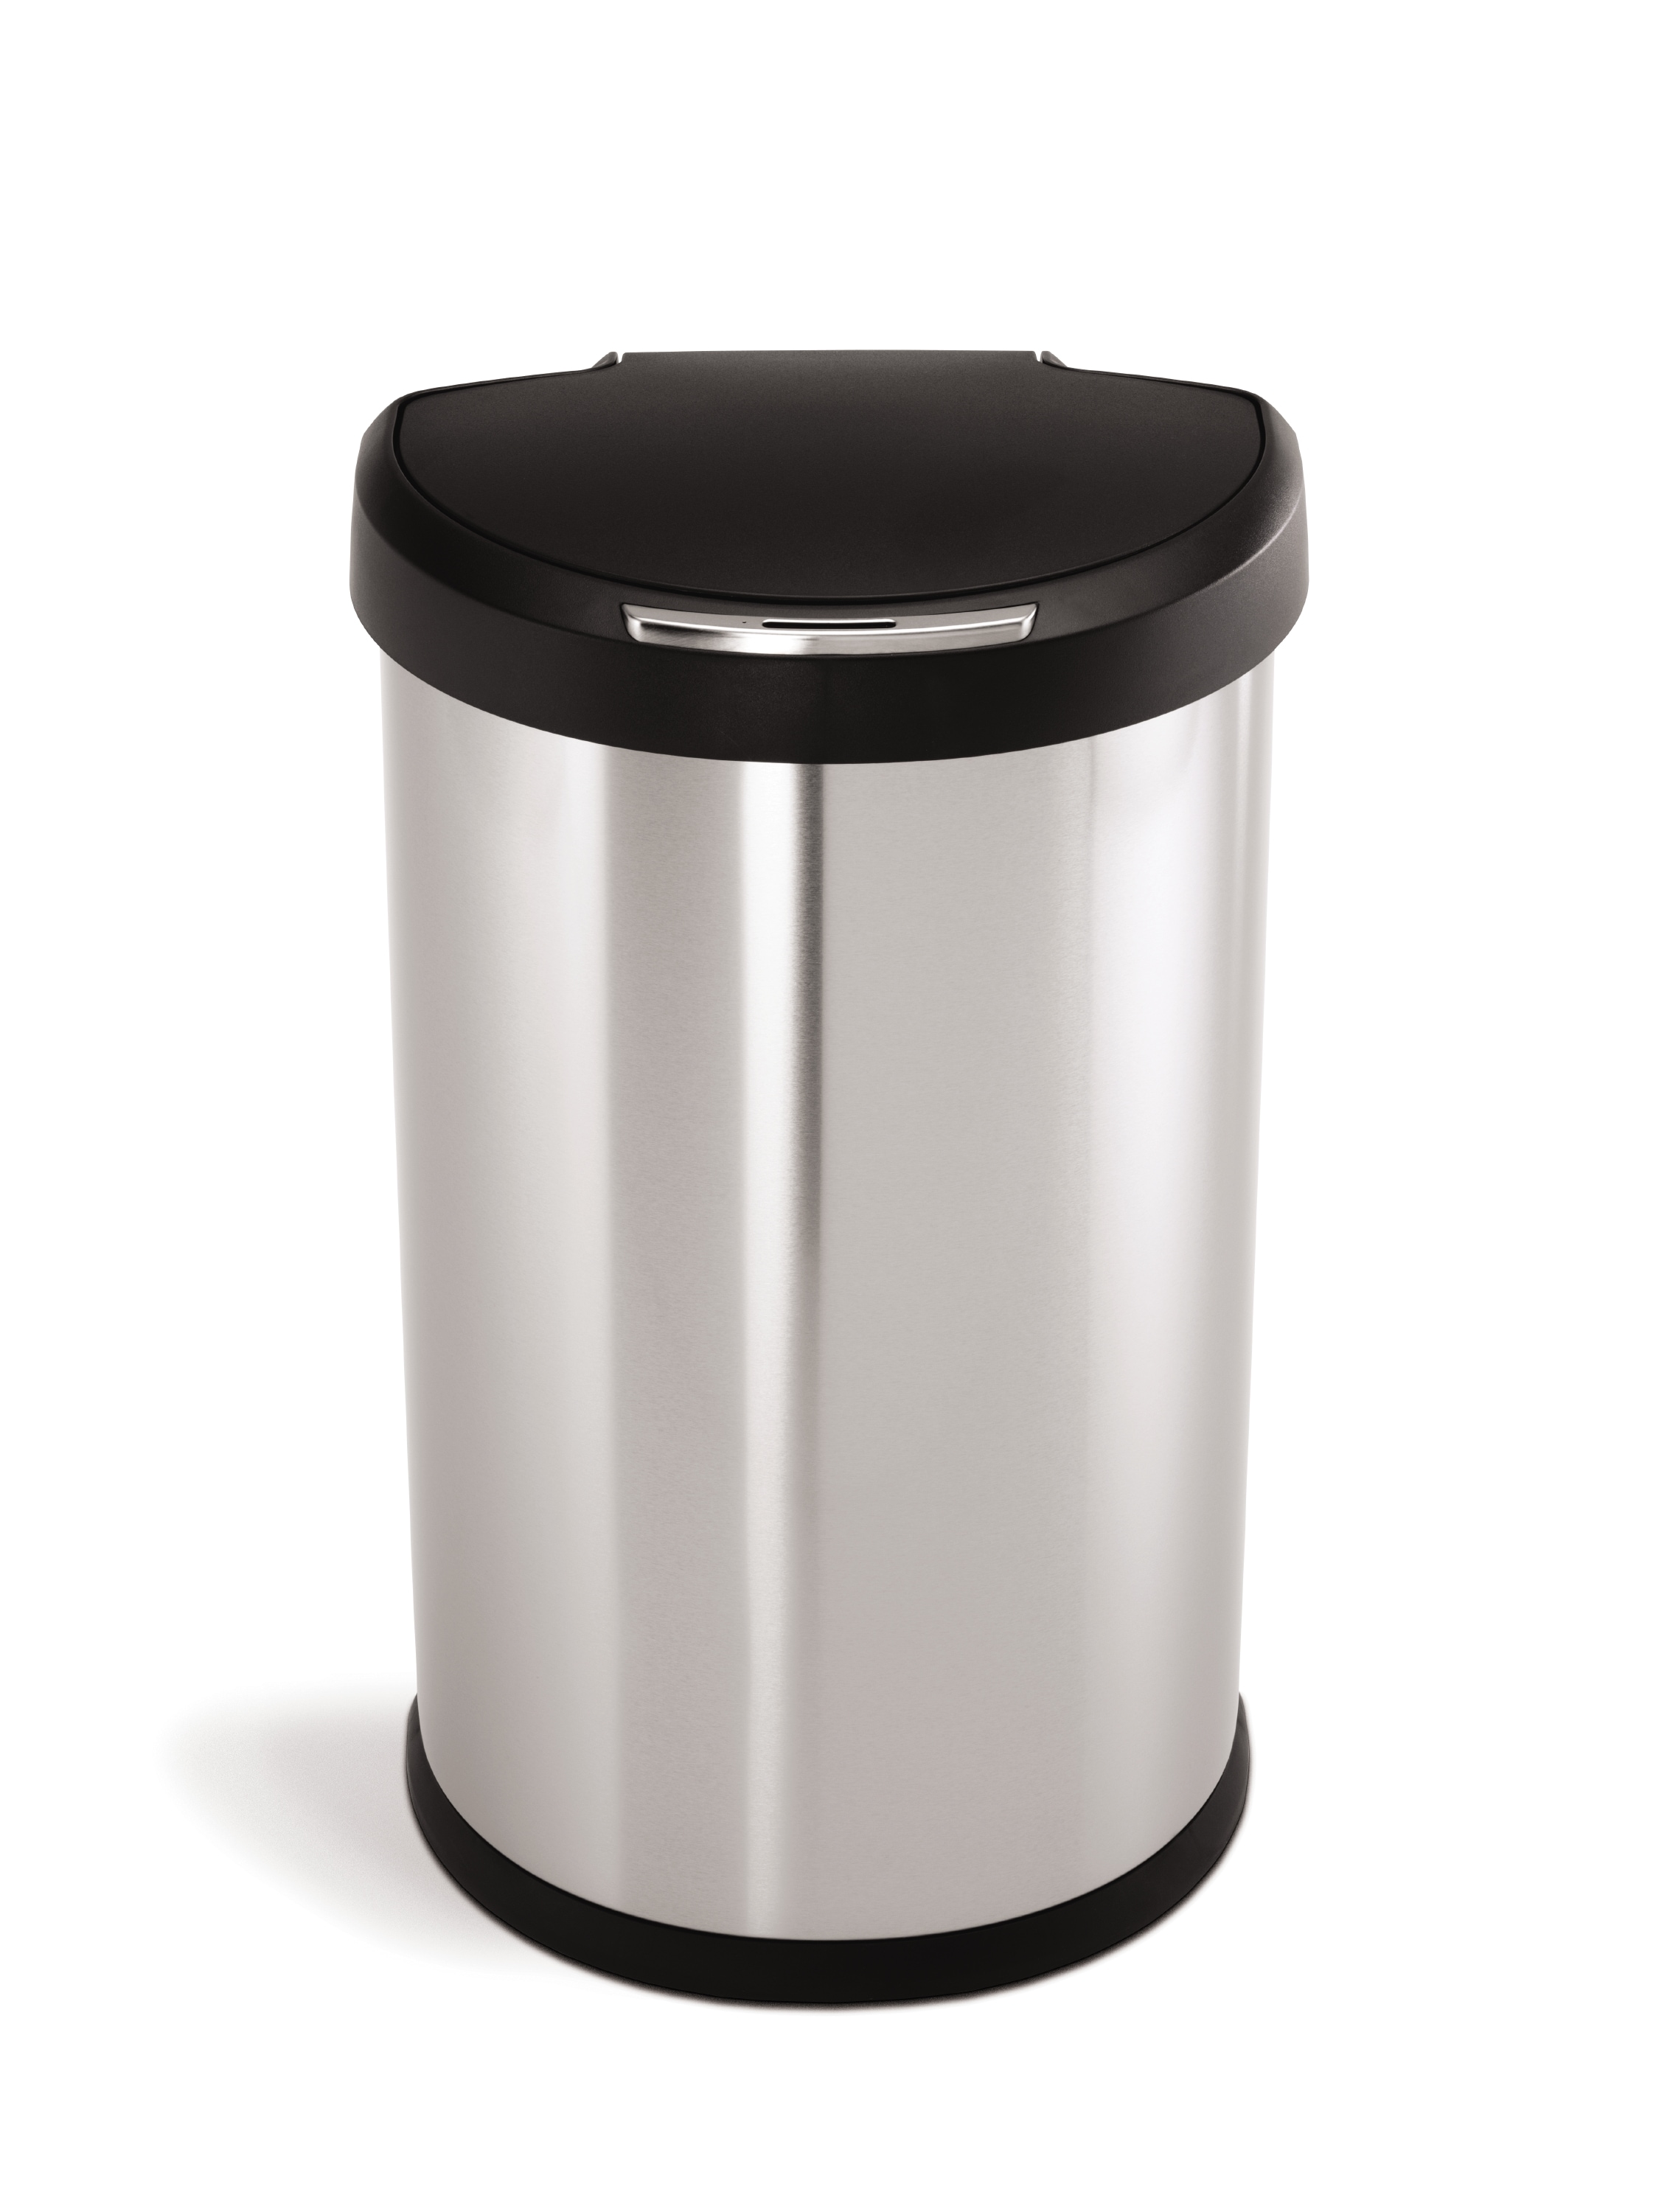 Simplehuman 45l Semi-round Step Trash Can Brushed Stainless Steel : Target